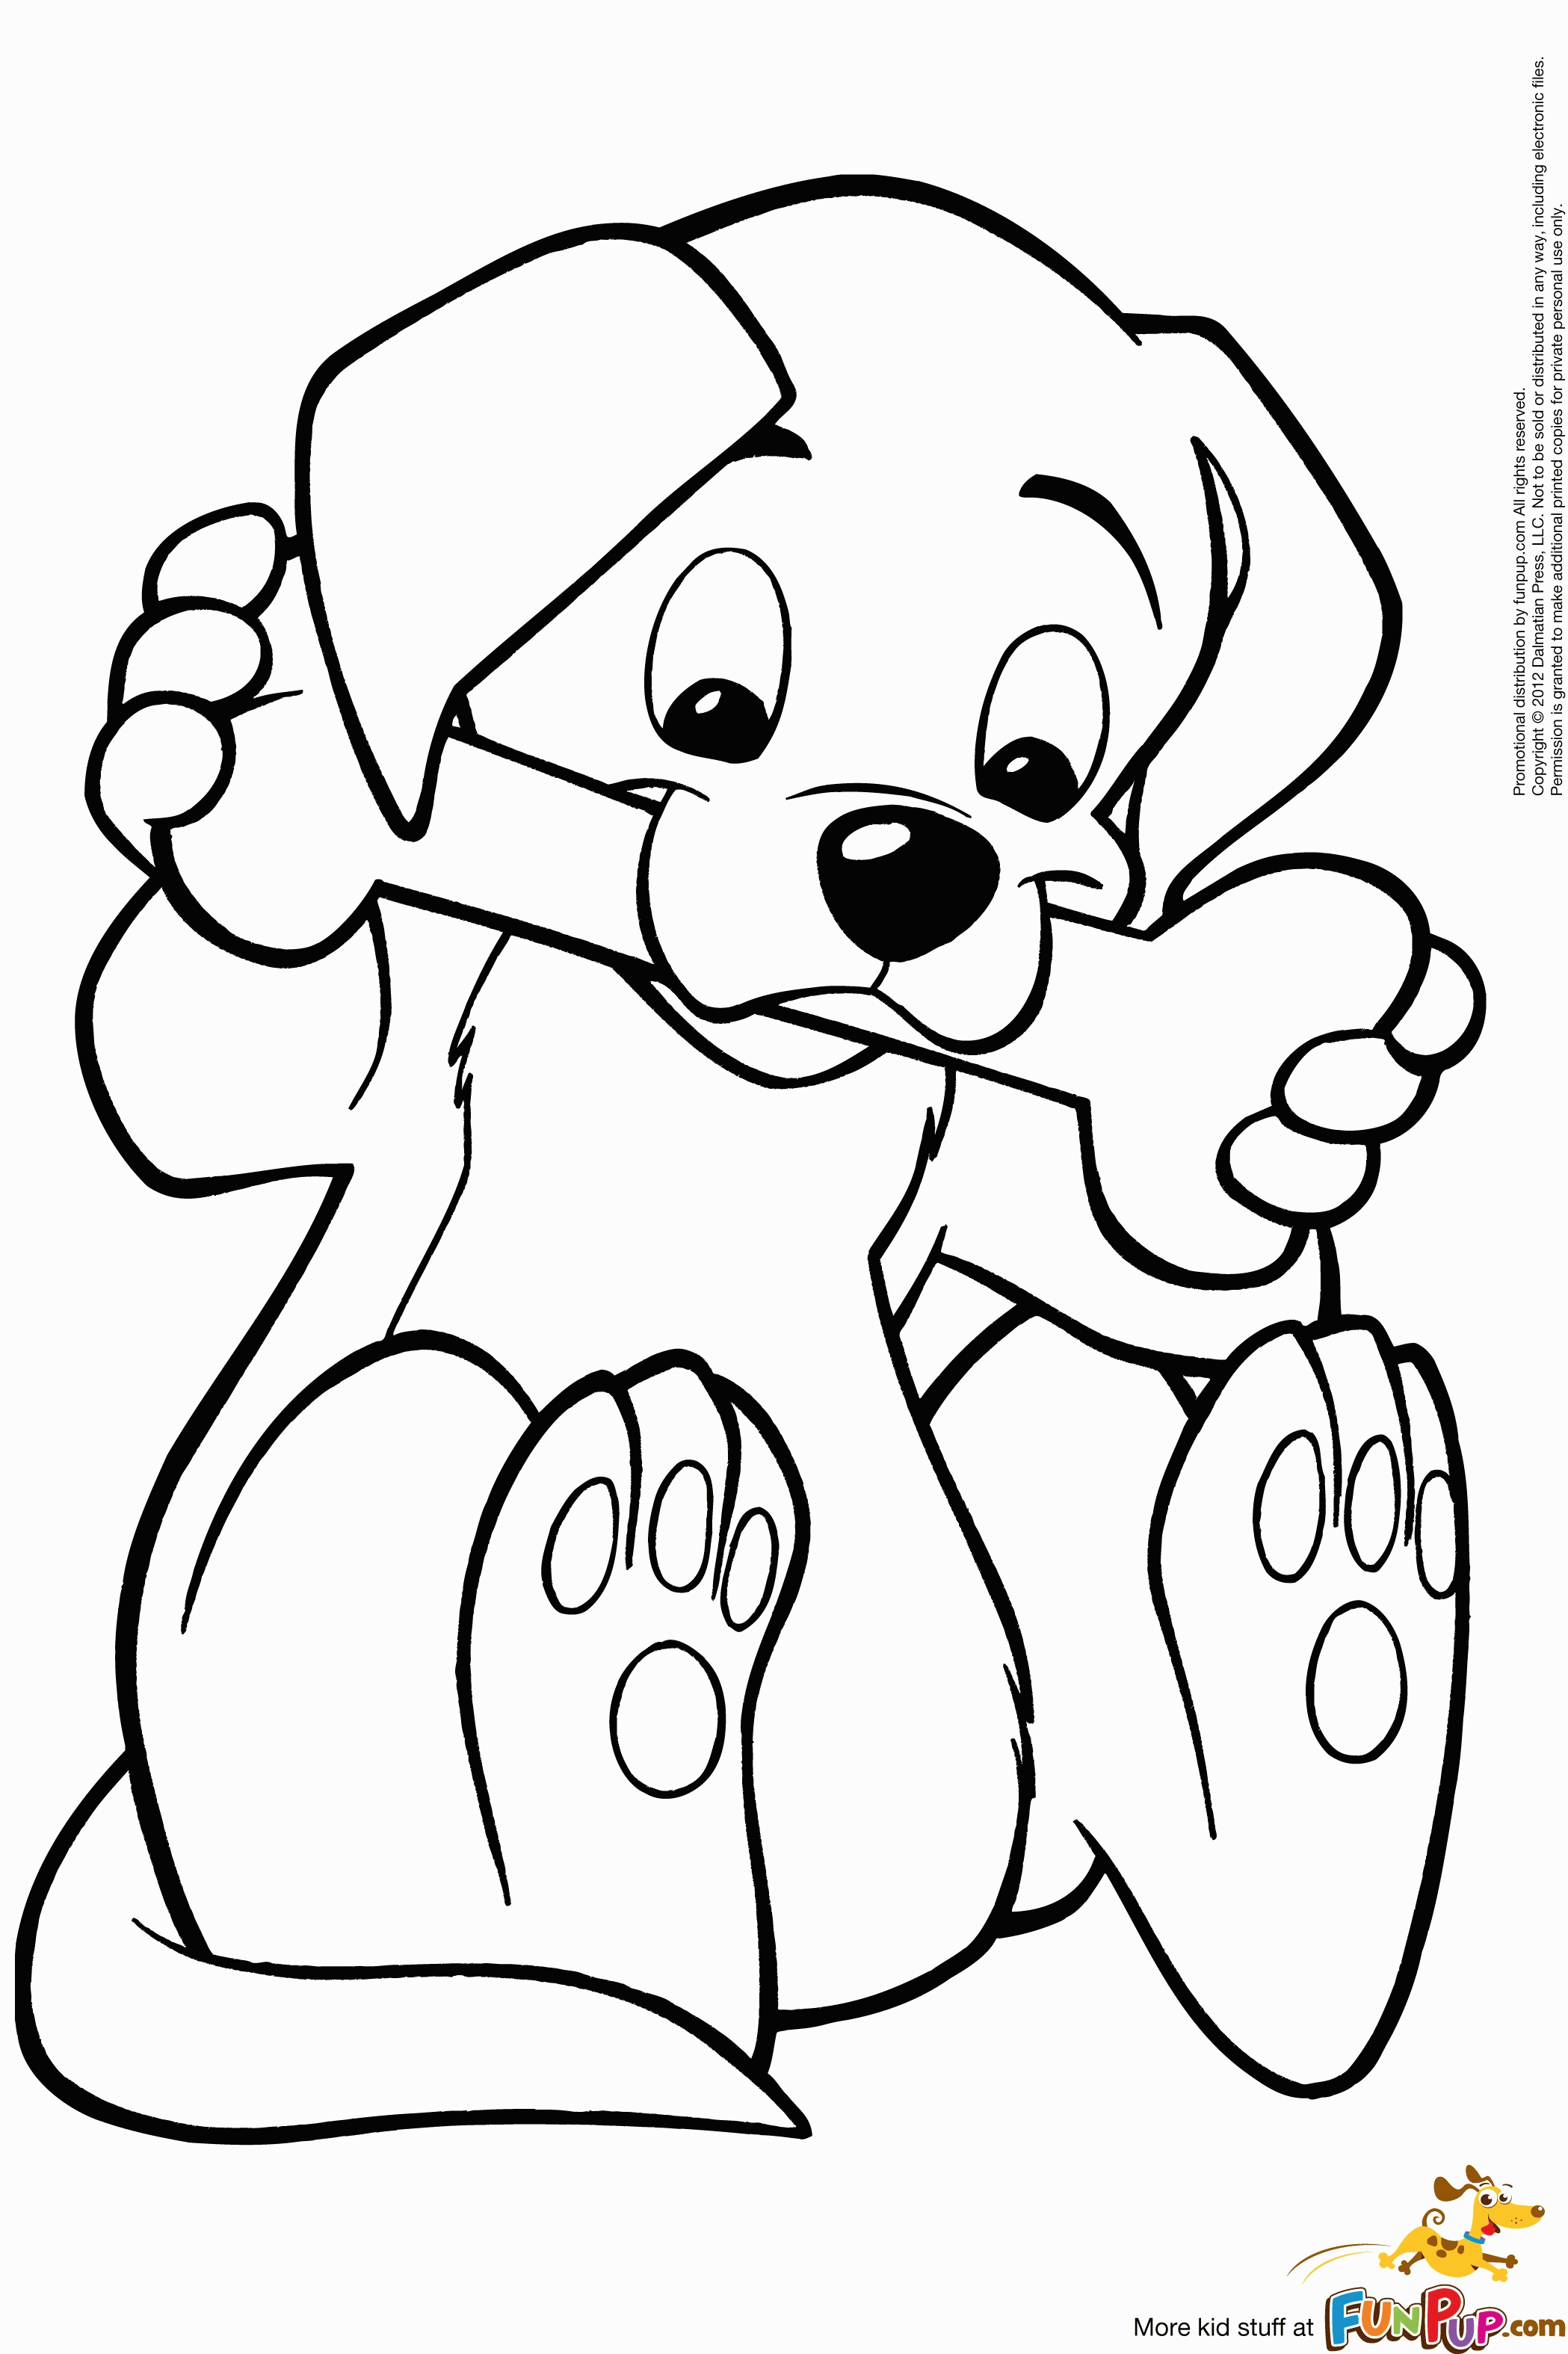 Puppy Coloring Pages To Print Free - Coloring Home